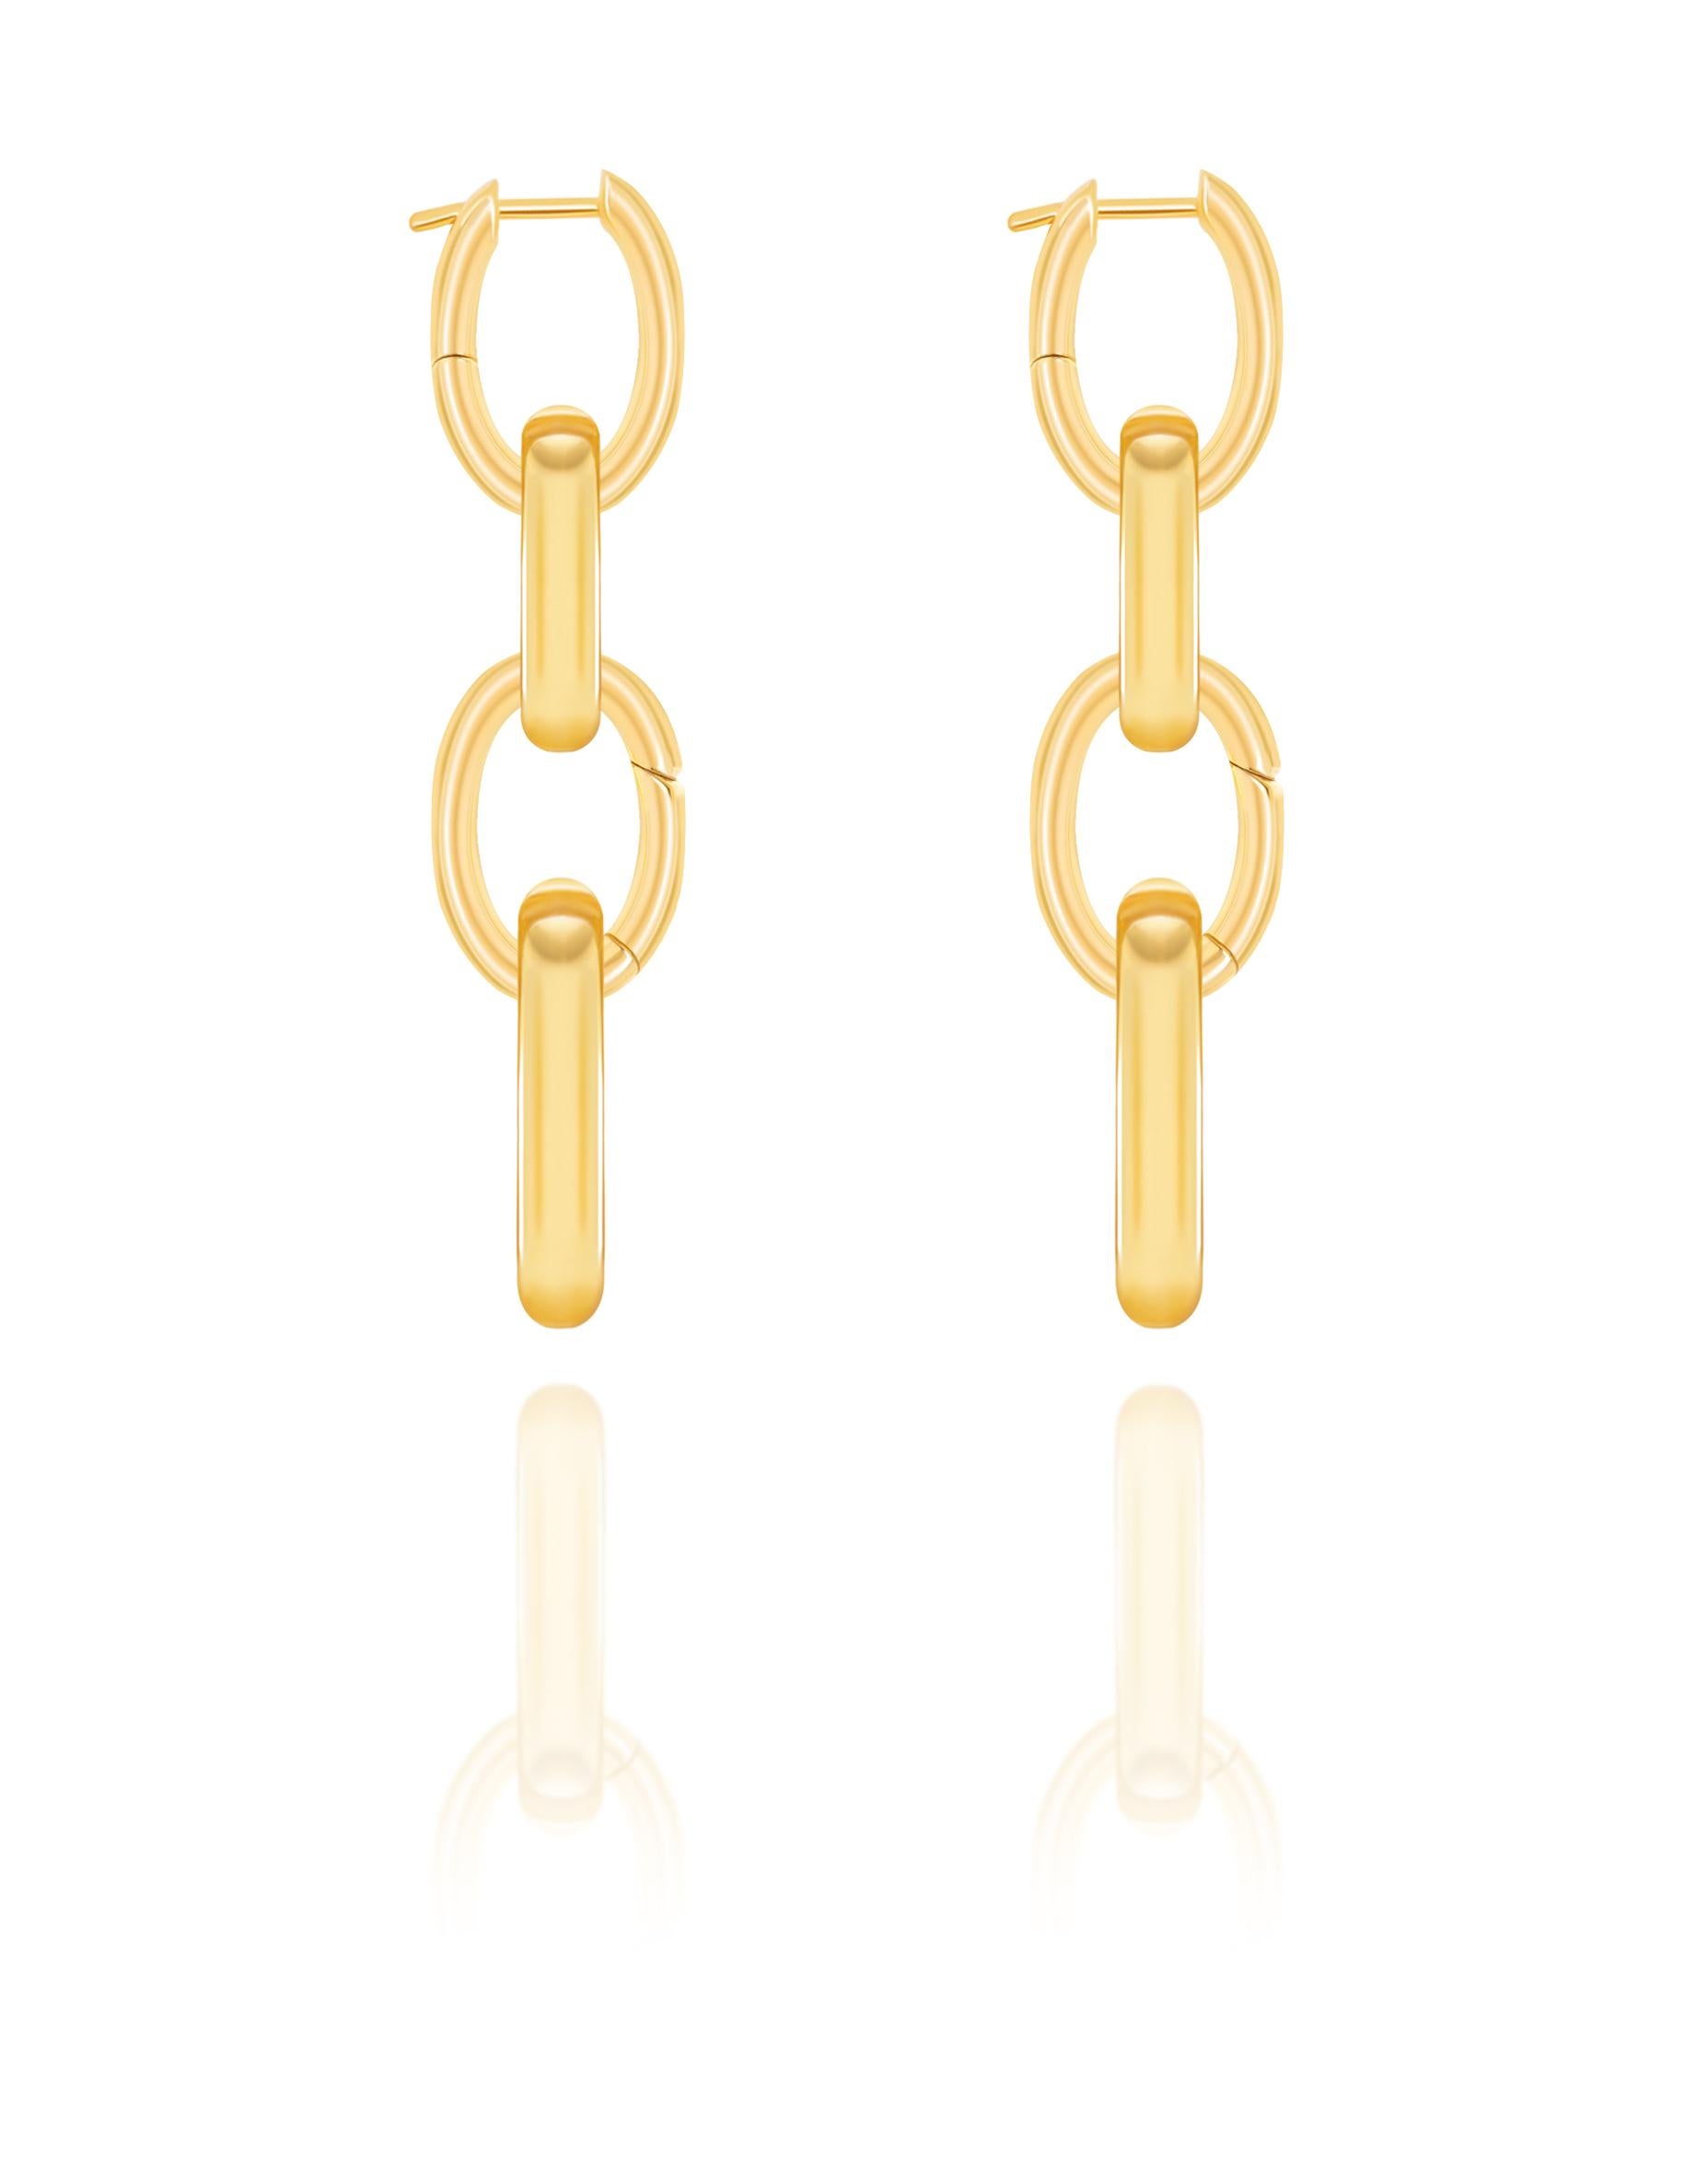 The Renaissance Romance Earrings - A Love Affair Collection

Just like our favorite, classic movie, Roman Holiday, the matching earrings (that pays homage to Rome) is just that: classic and state-of-the-art. These statement earrings can be worn 19